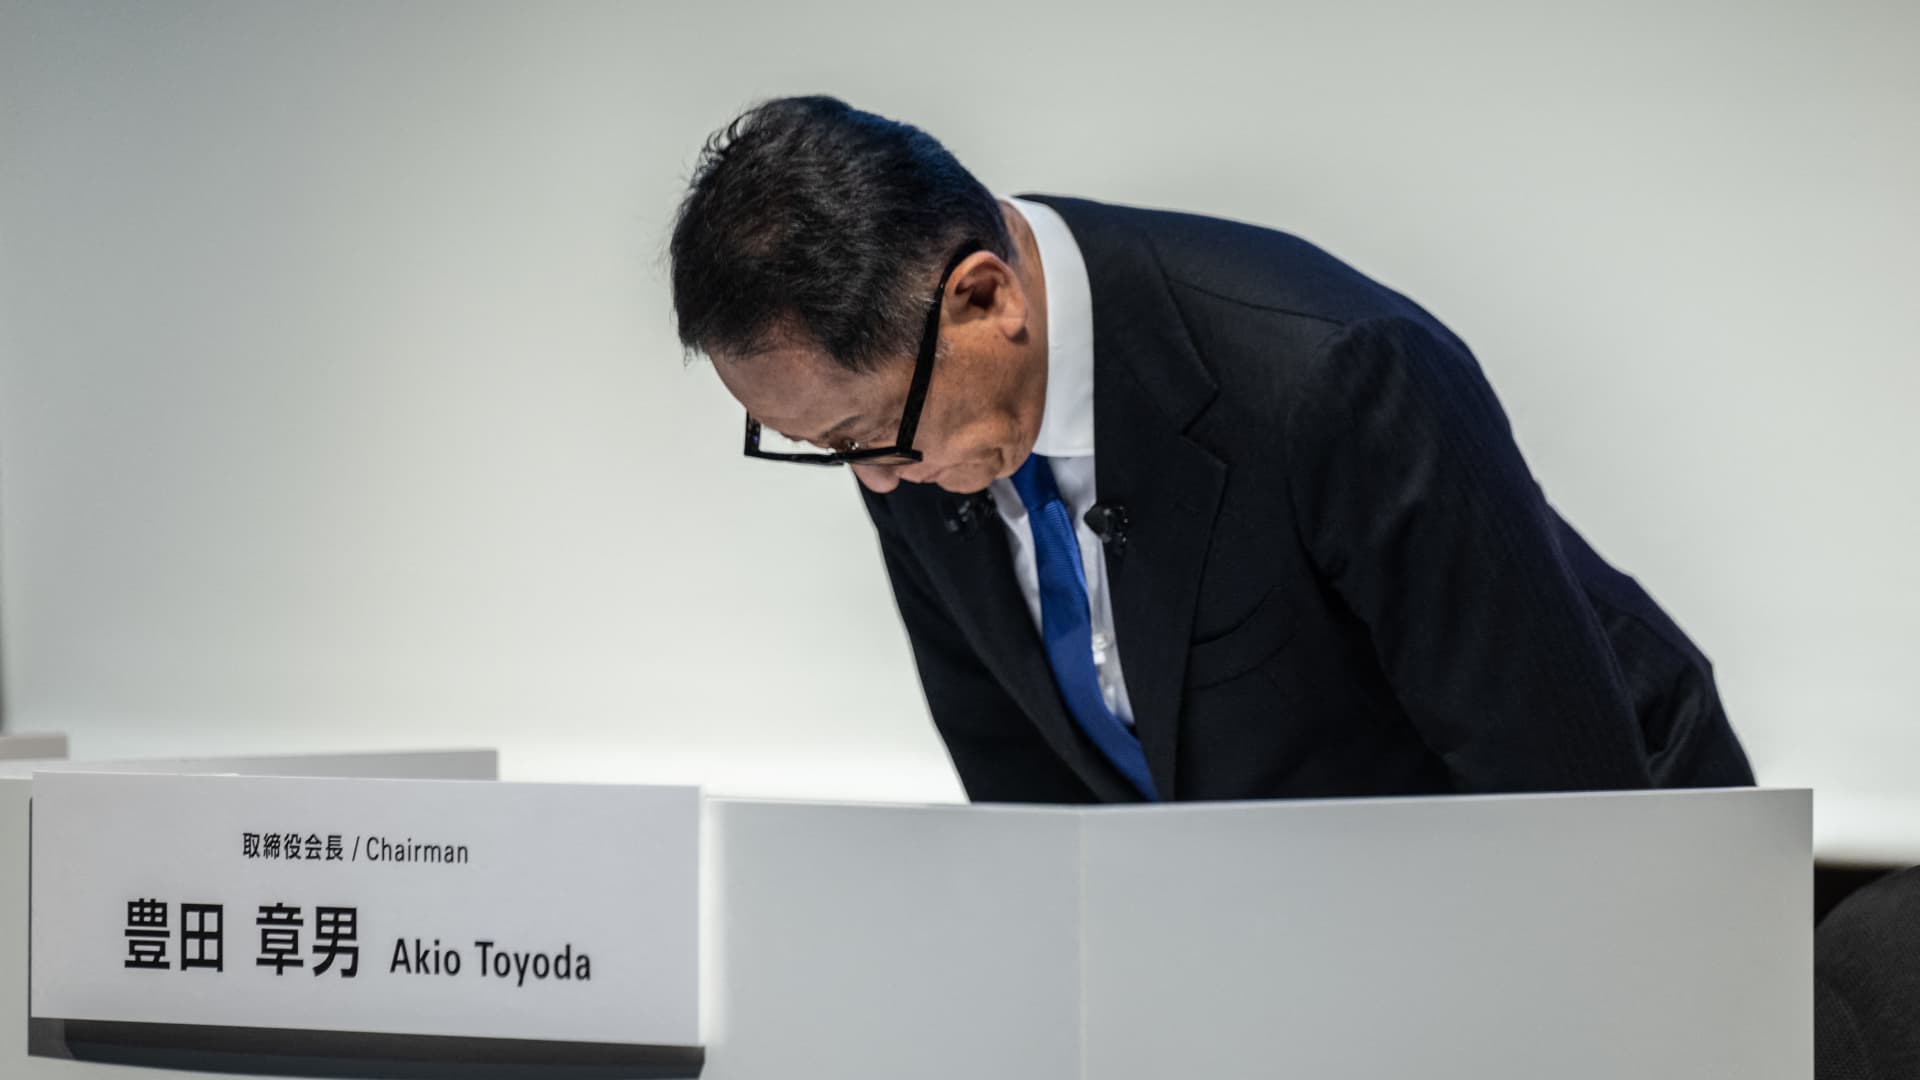 Shares of Toyota, Mazda, Honda and Suzuki fall after safety scandal